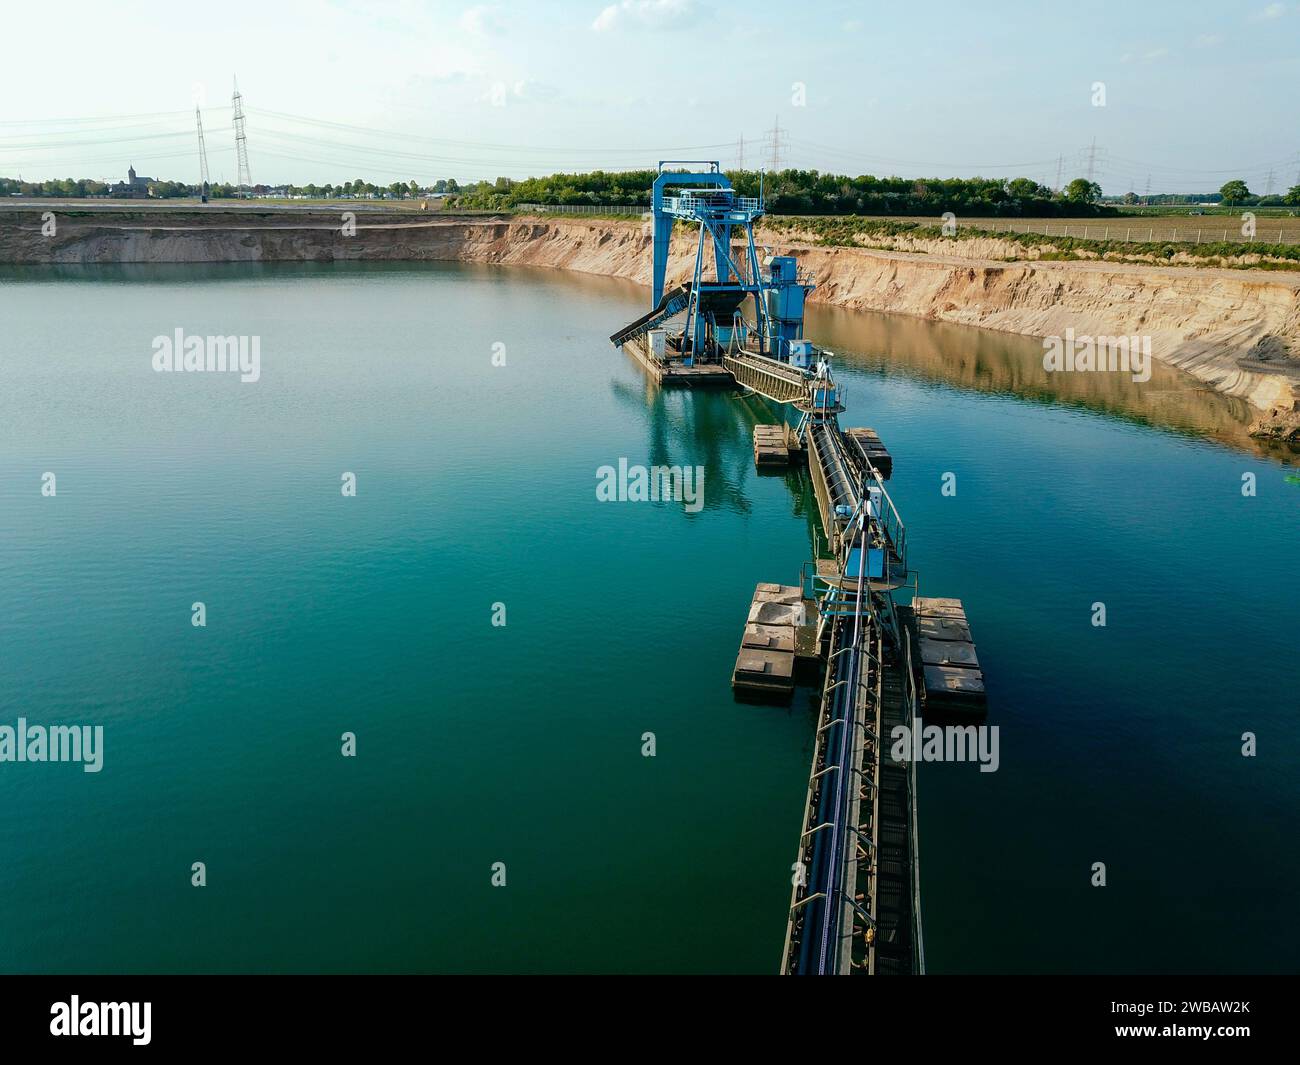 A gravel plant on a lake, photographed with a drone Stock Photo